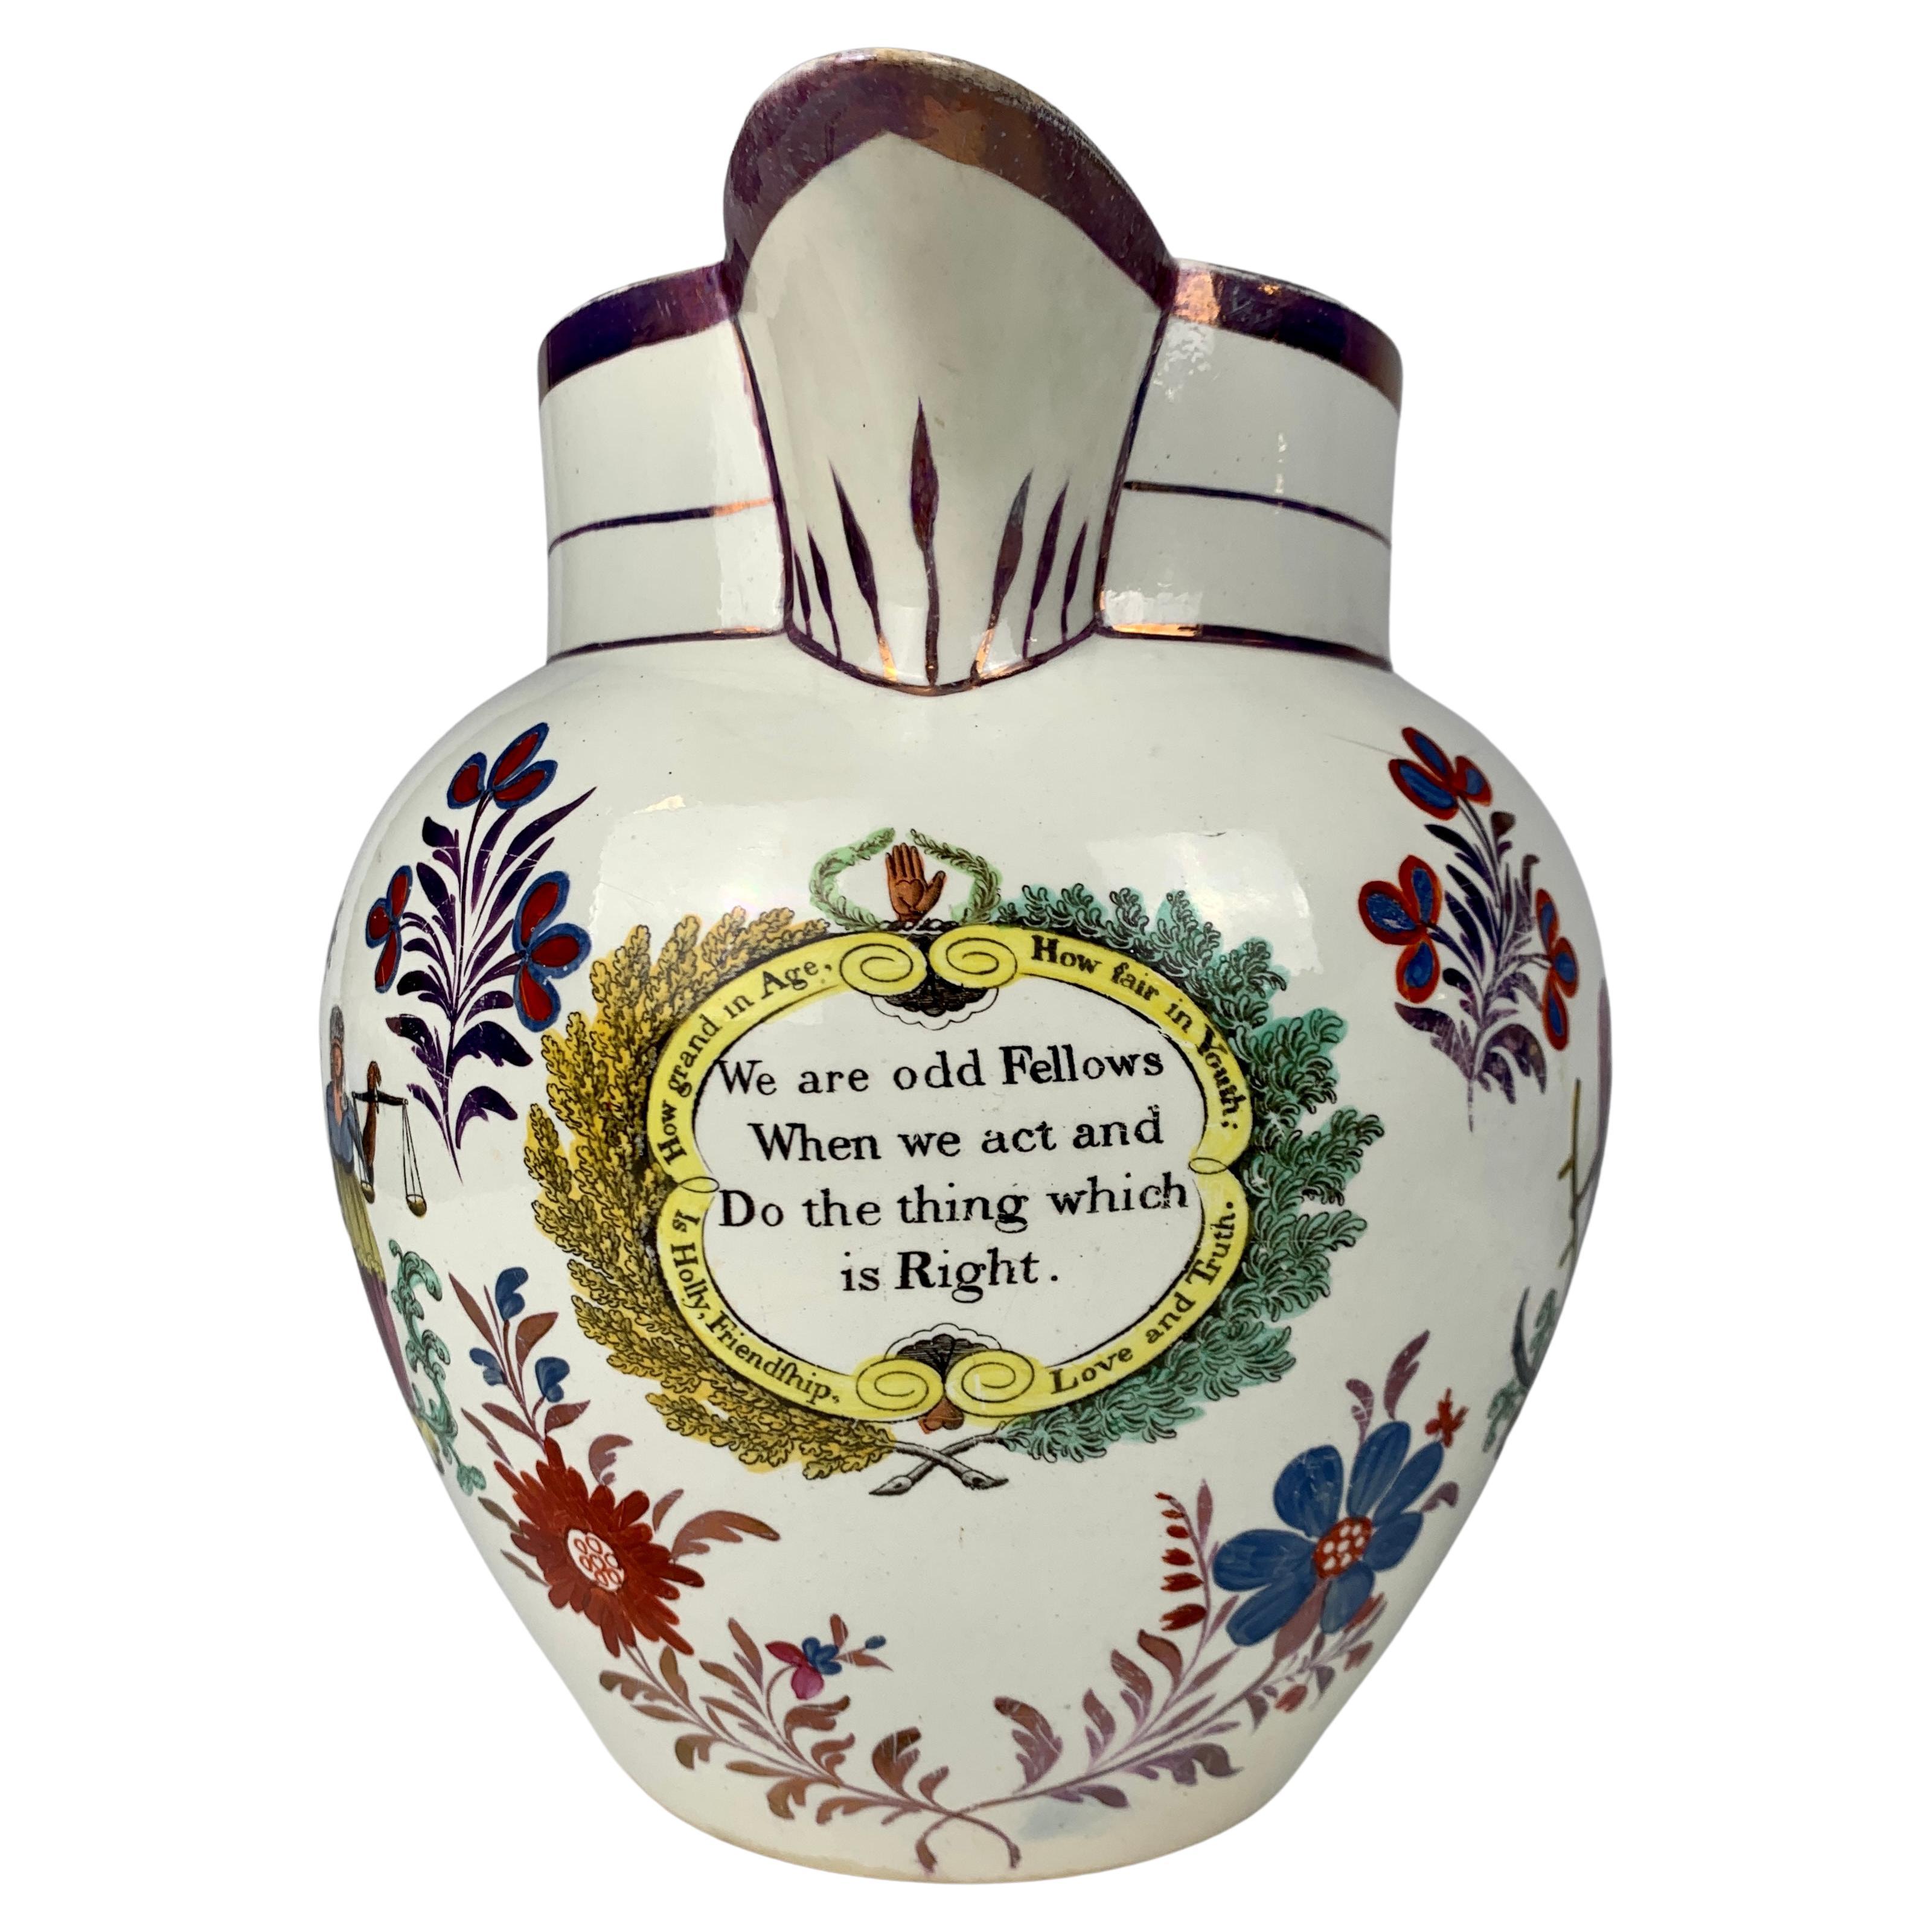 This massive and rare pitcher is fully decorated with the imagery and symbols of the Masons and Odd Fellows (see images). Odd Fellows promote philanthropy, the ethic of reciprocity, and charity. 
At the front of the pitcher, we see a panel with the